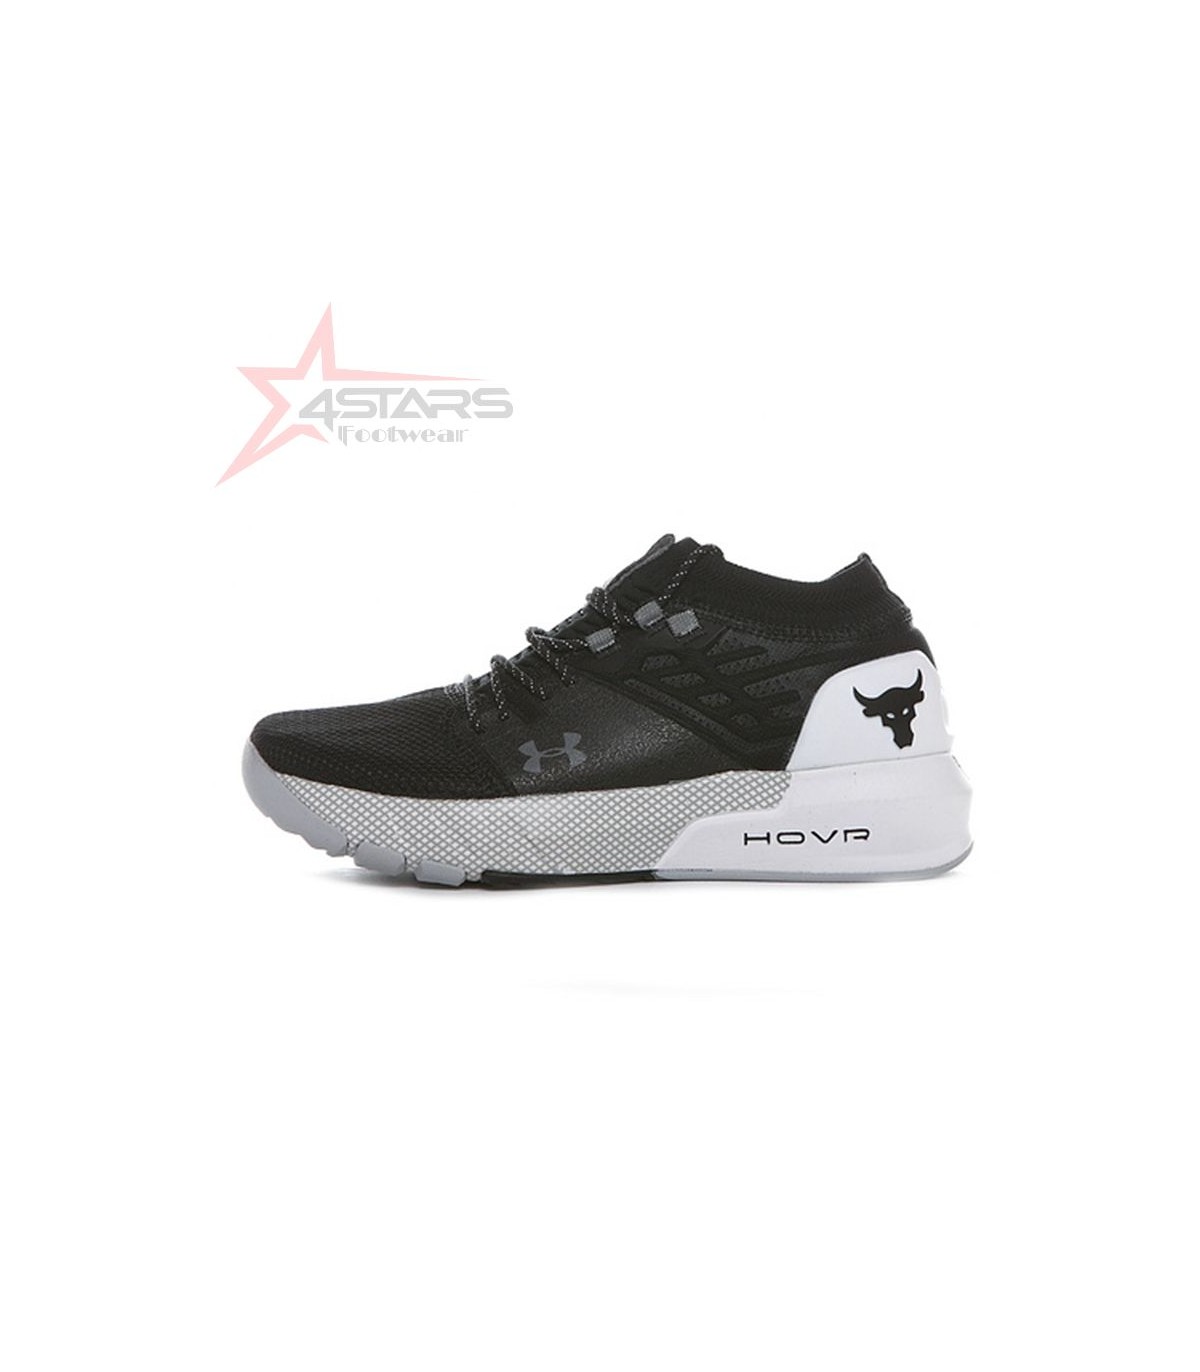 Under Armour Project Rock 2 - Black/White